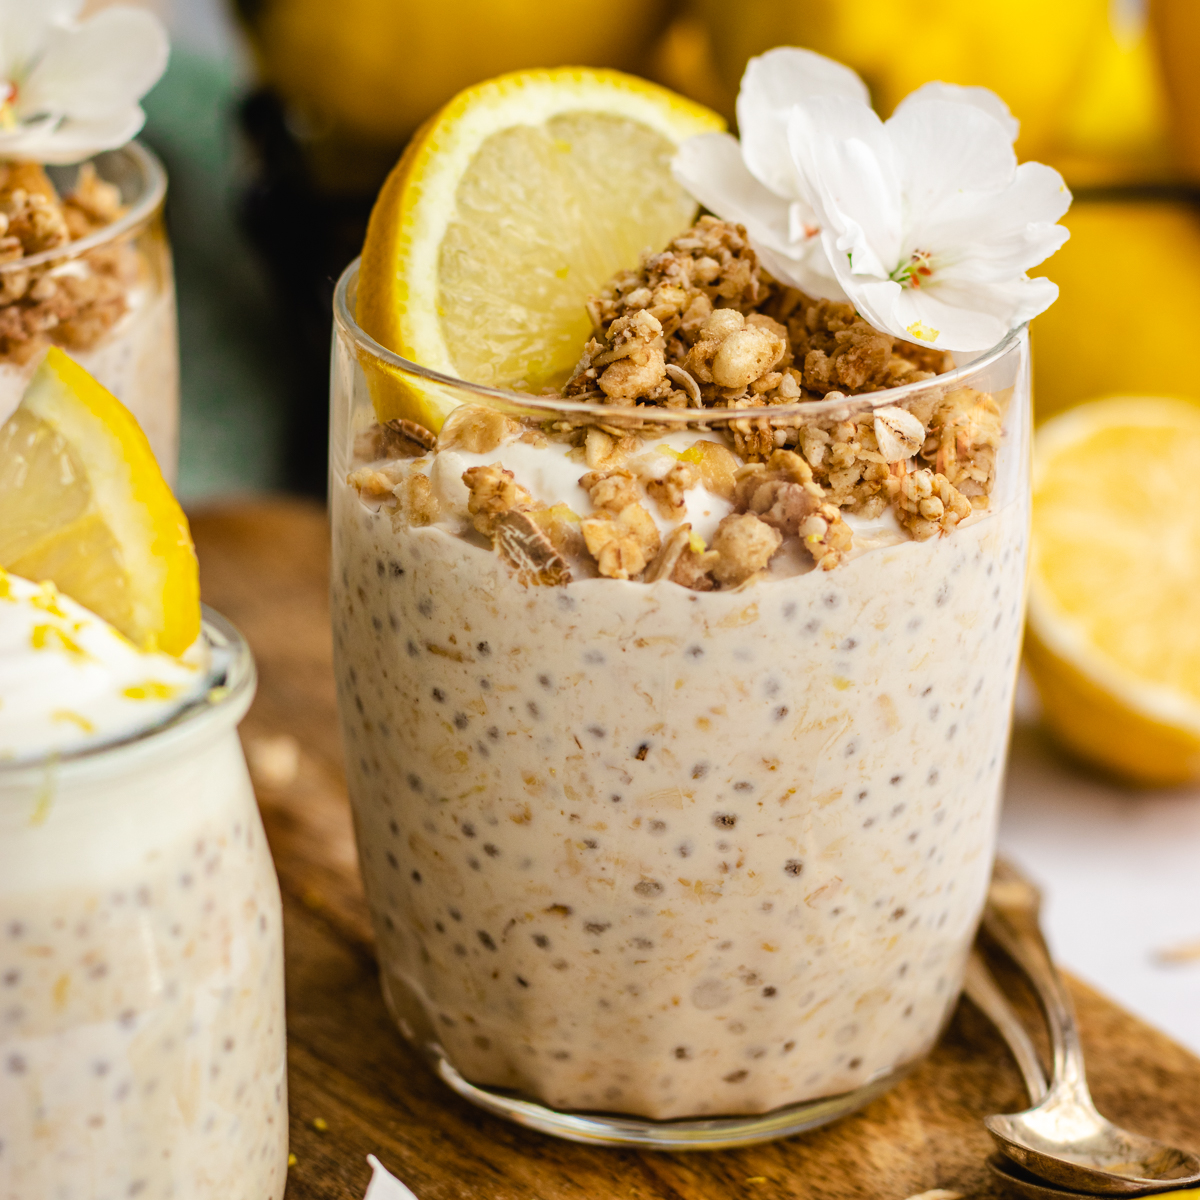 Lemon cheesecake overnight oats served in a glass topped with yoghurt, granola and lemon.